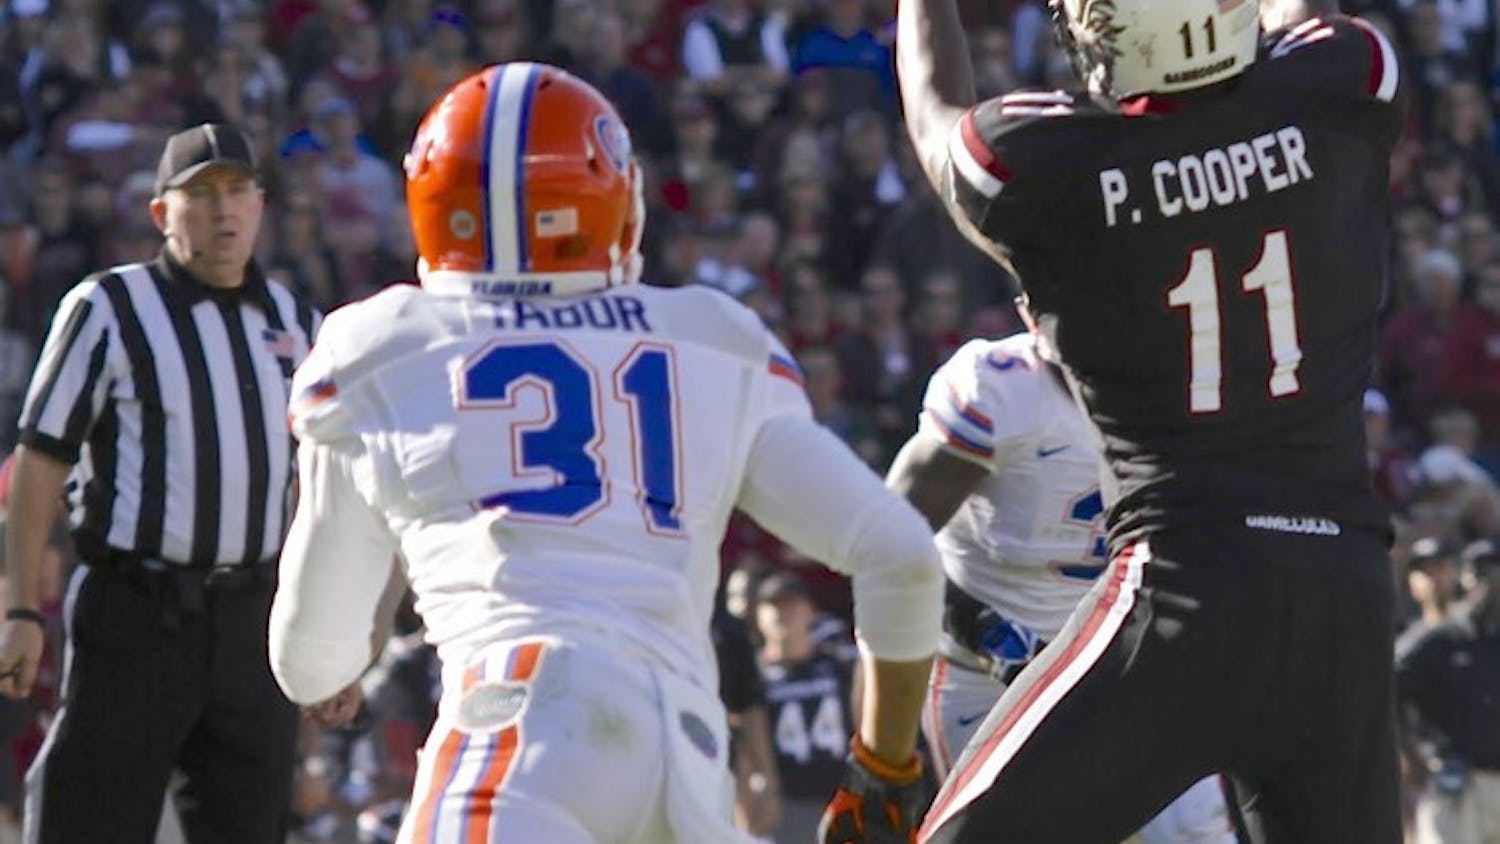 Pharoh Cooper announced last week that he would forgo his senior season and instead declare for the 2016 NFL Draft.